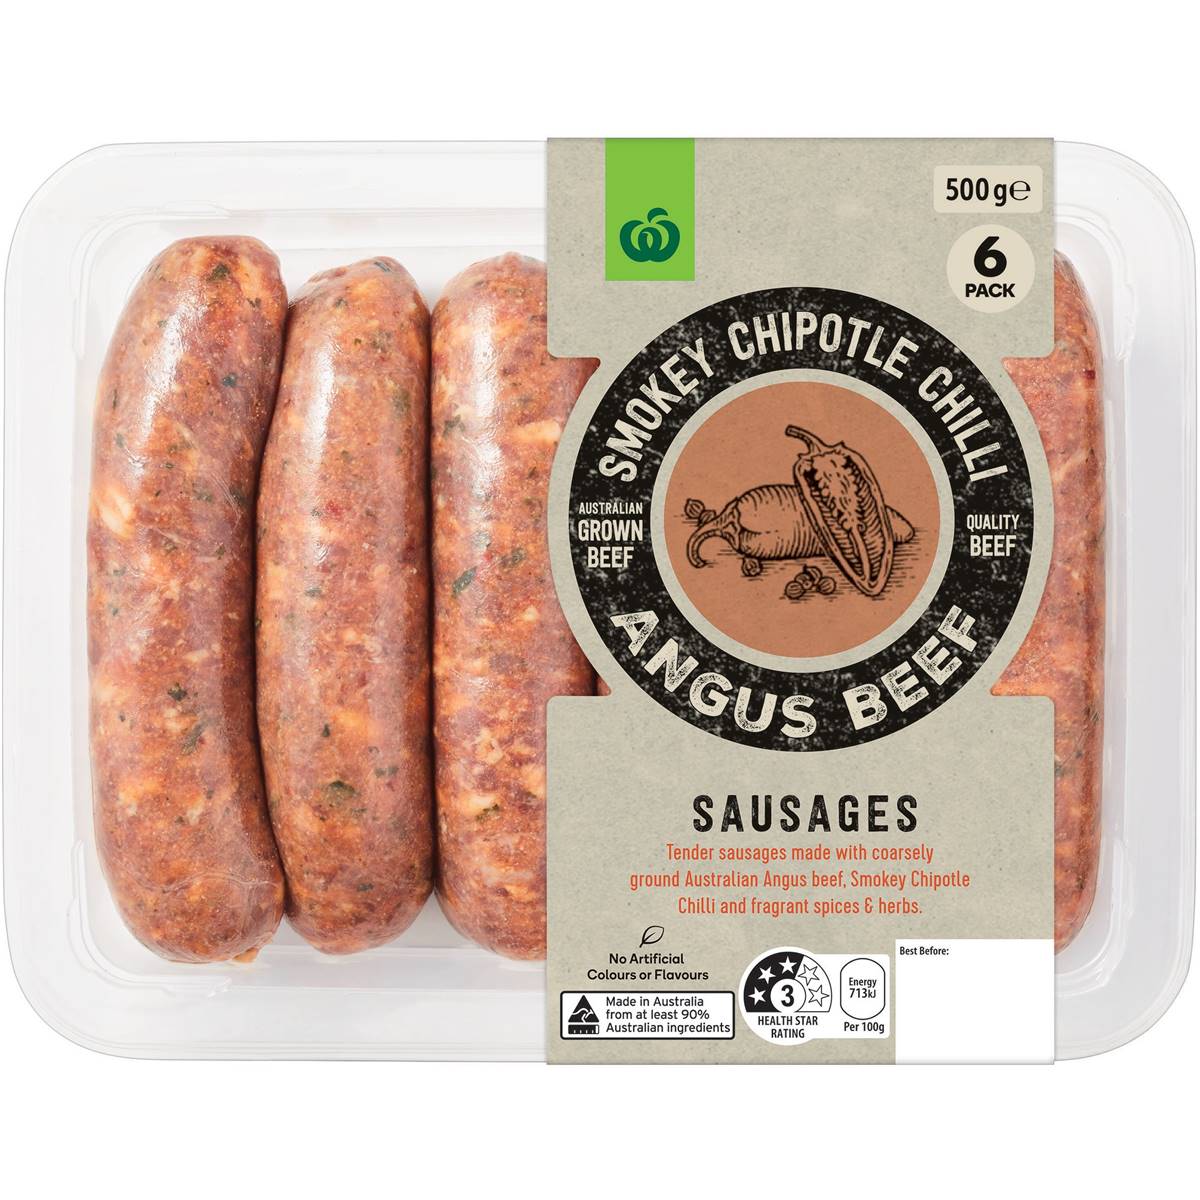 Calories in Woolworths Smokey Chipotle Chilli Angus Beef Sausages